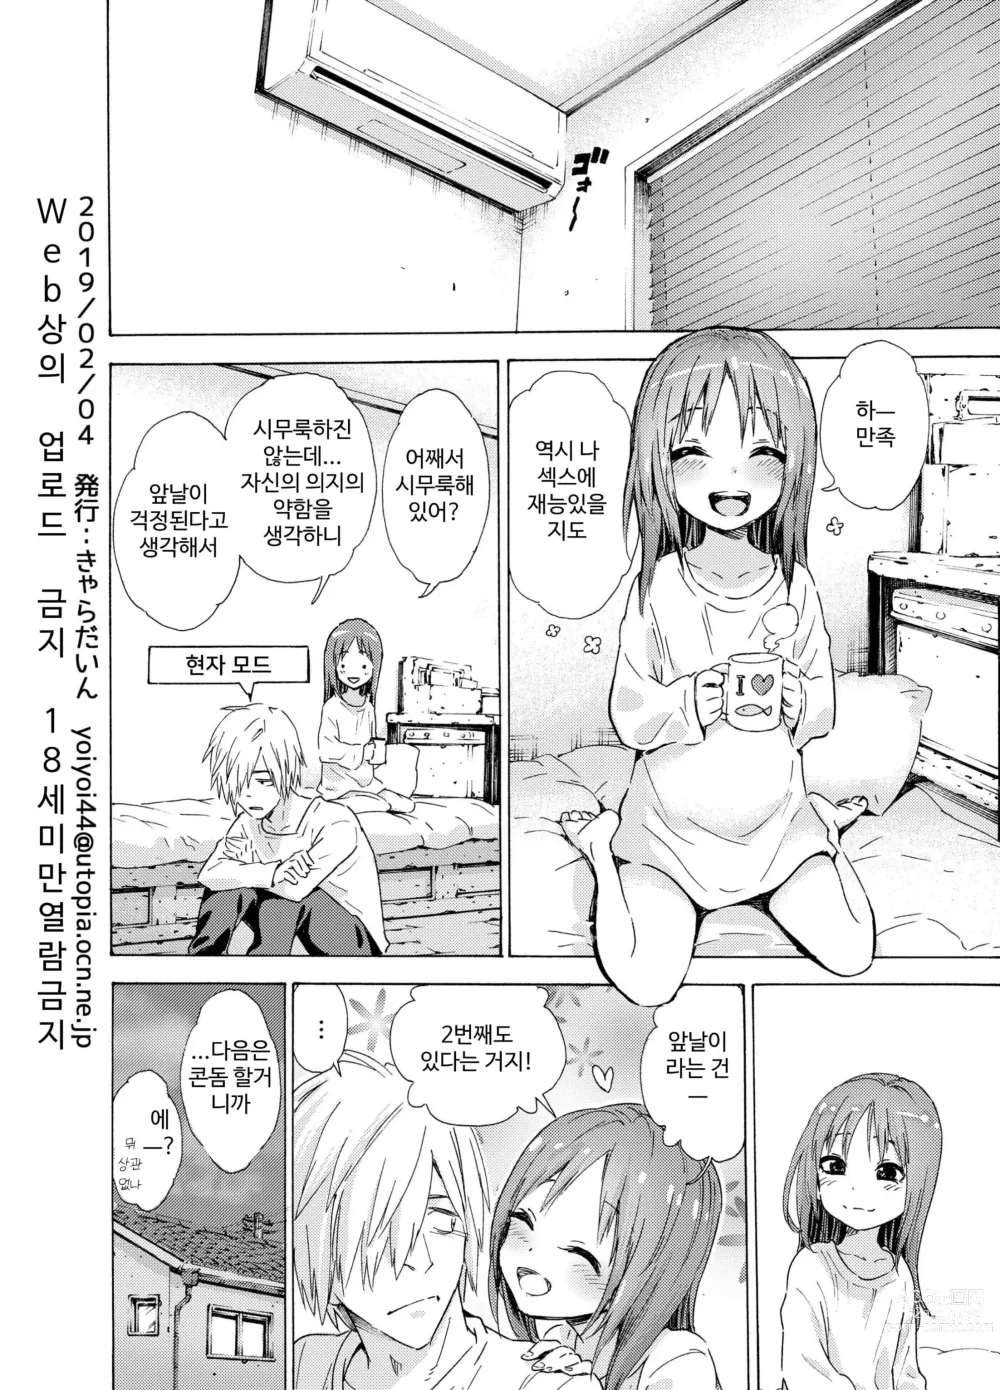 Page 24 of doujinshi 느닷없이 이츠키 섹스